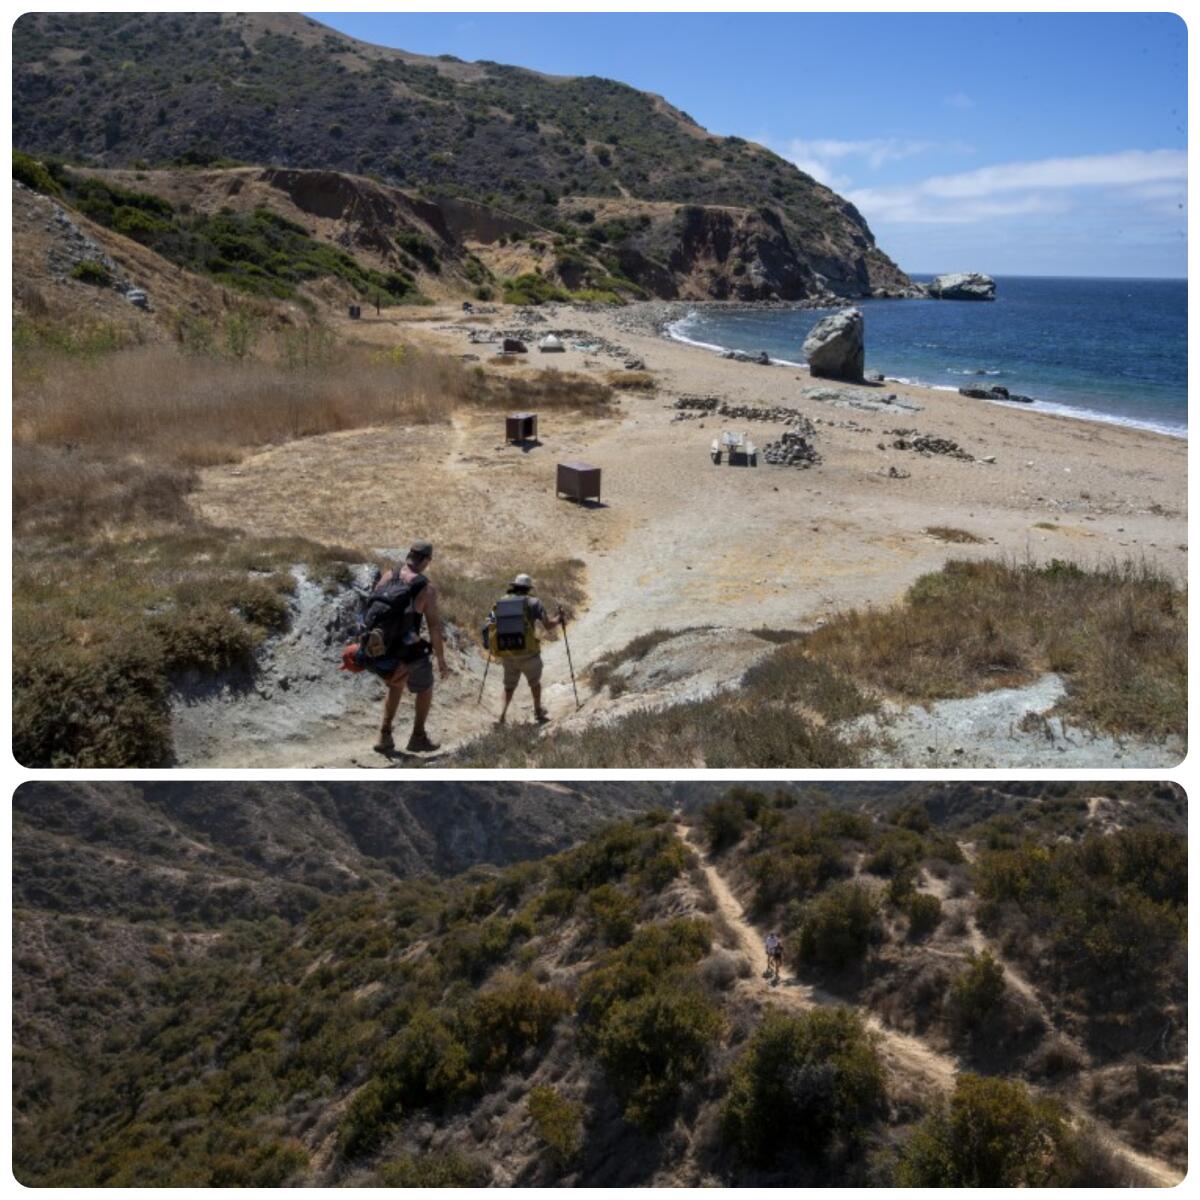 Hikers approach a small, sandy beach and a inland hiking trail.